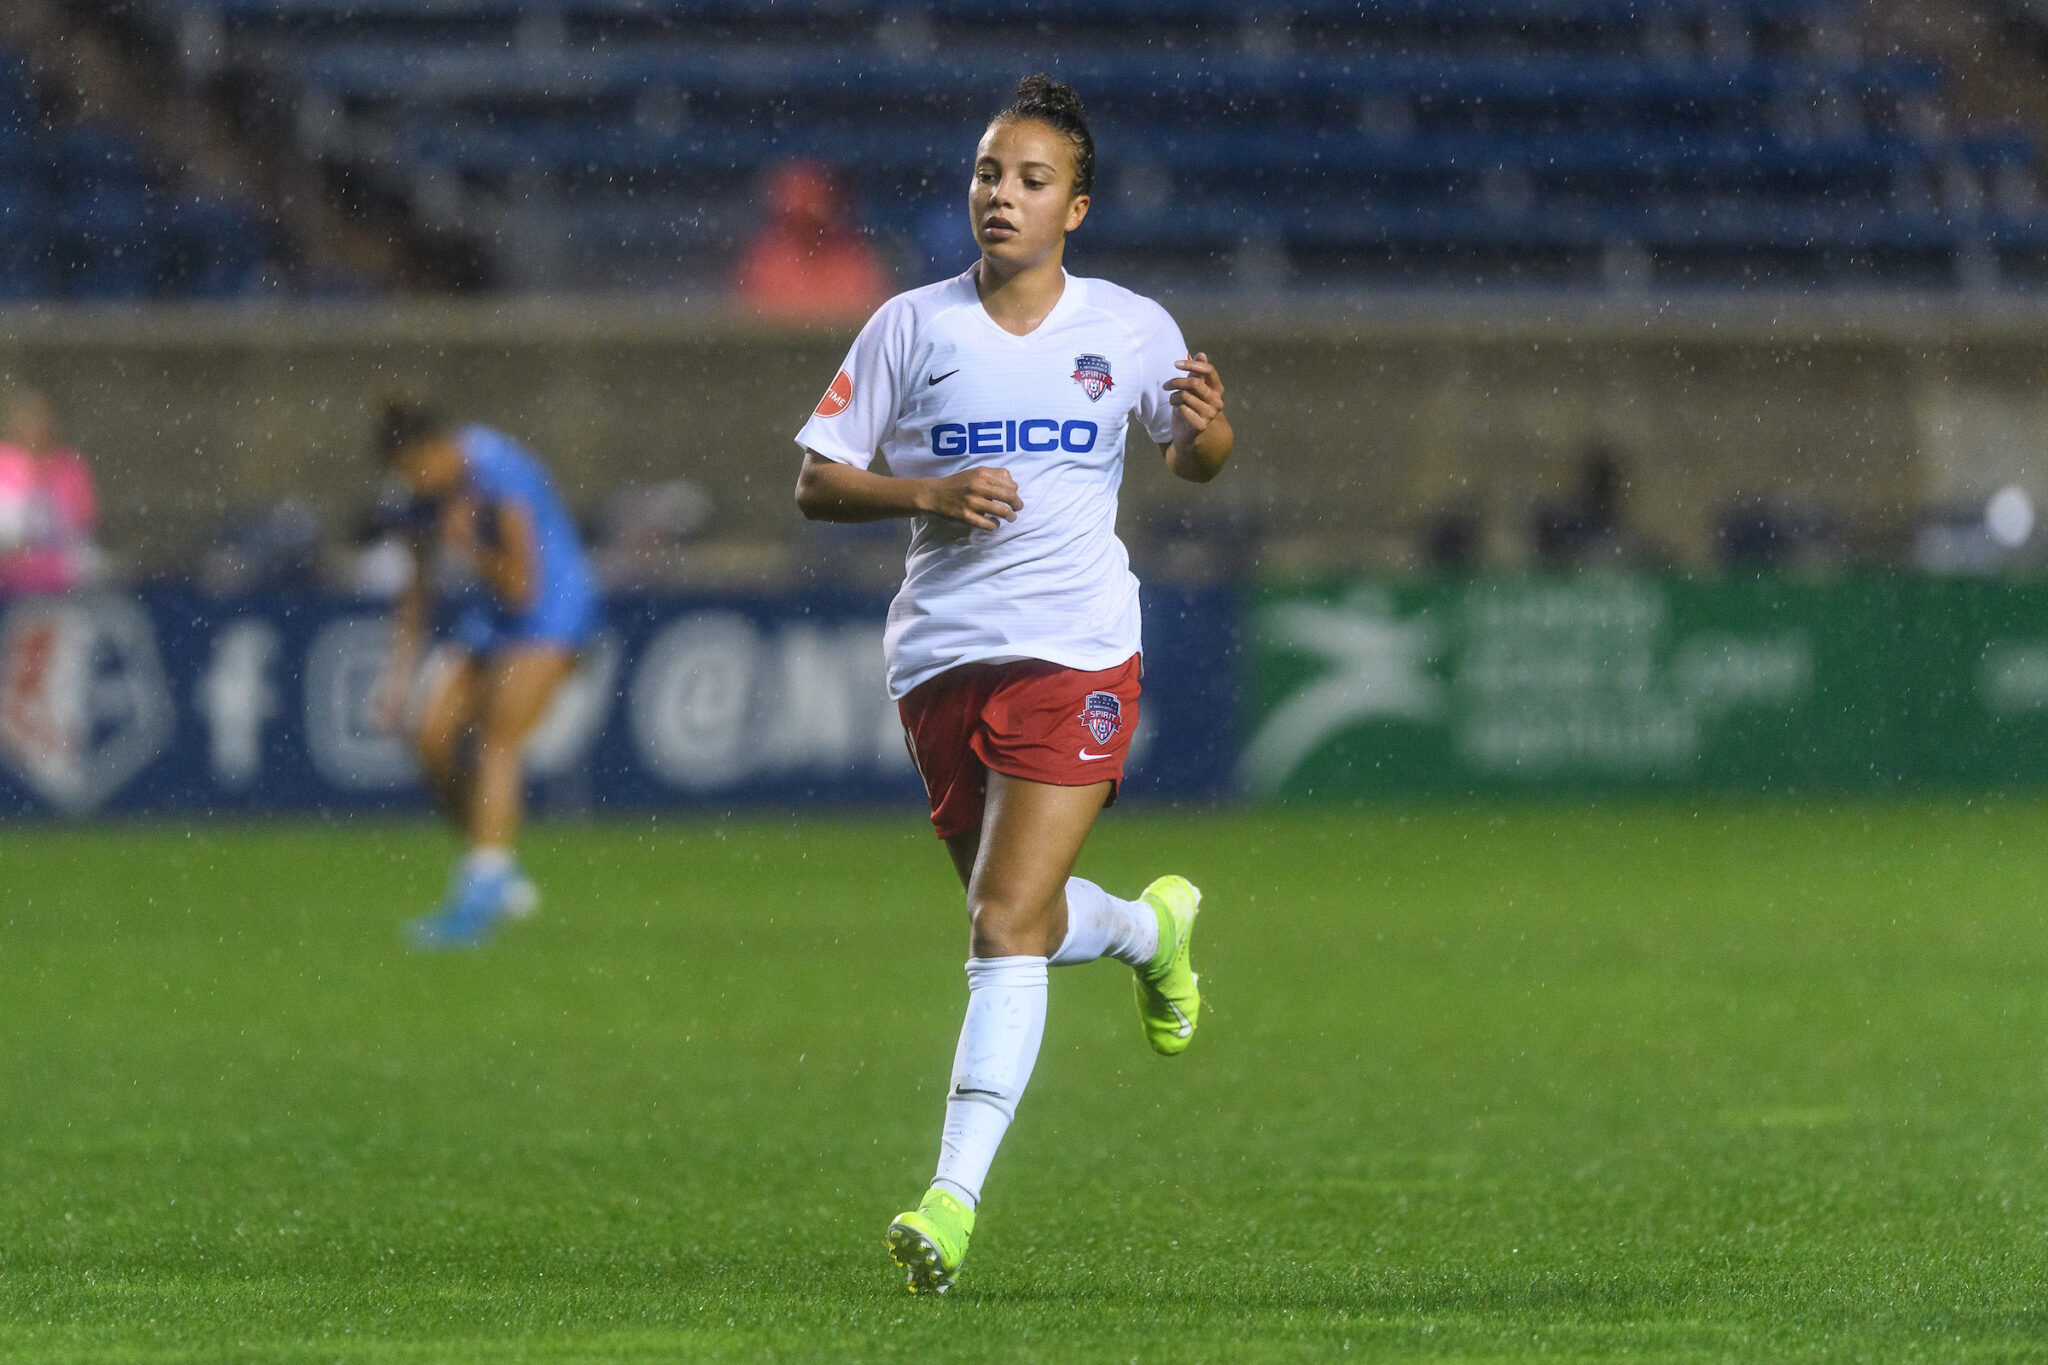 Mallory Pugh nominated for Week 23 Goal of the Week award Featured Image